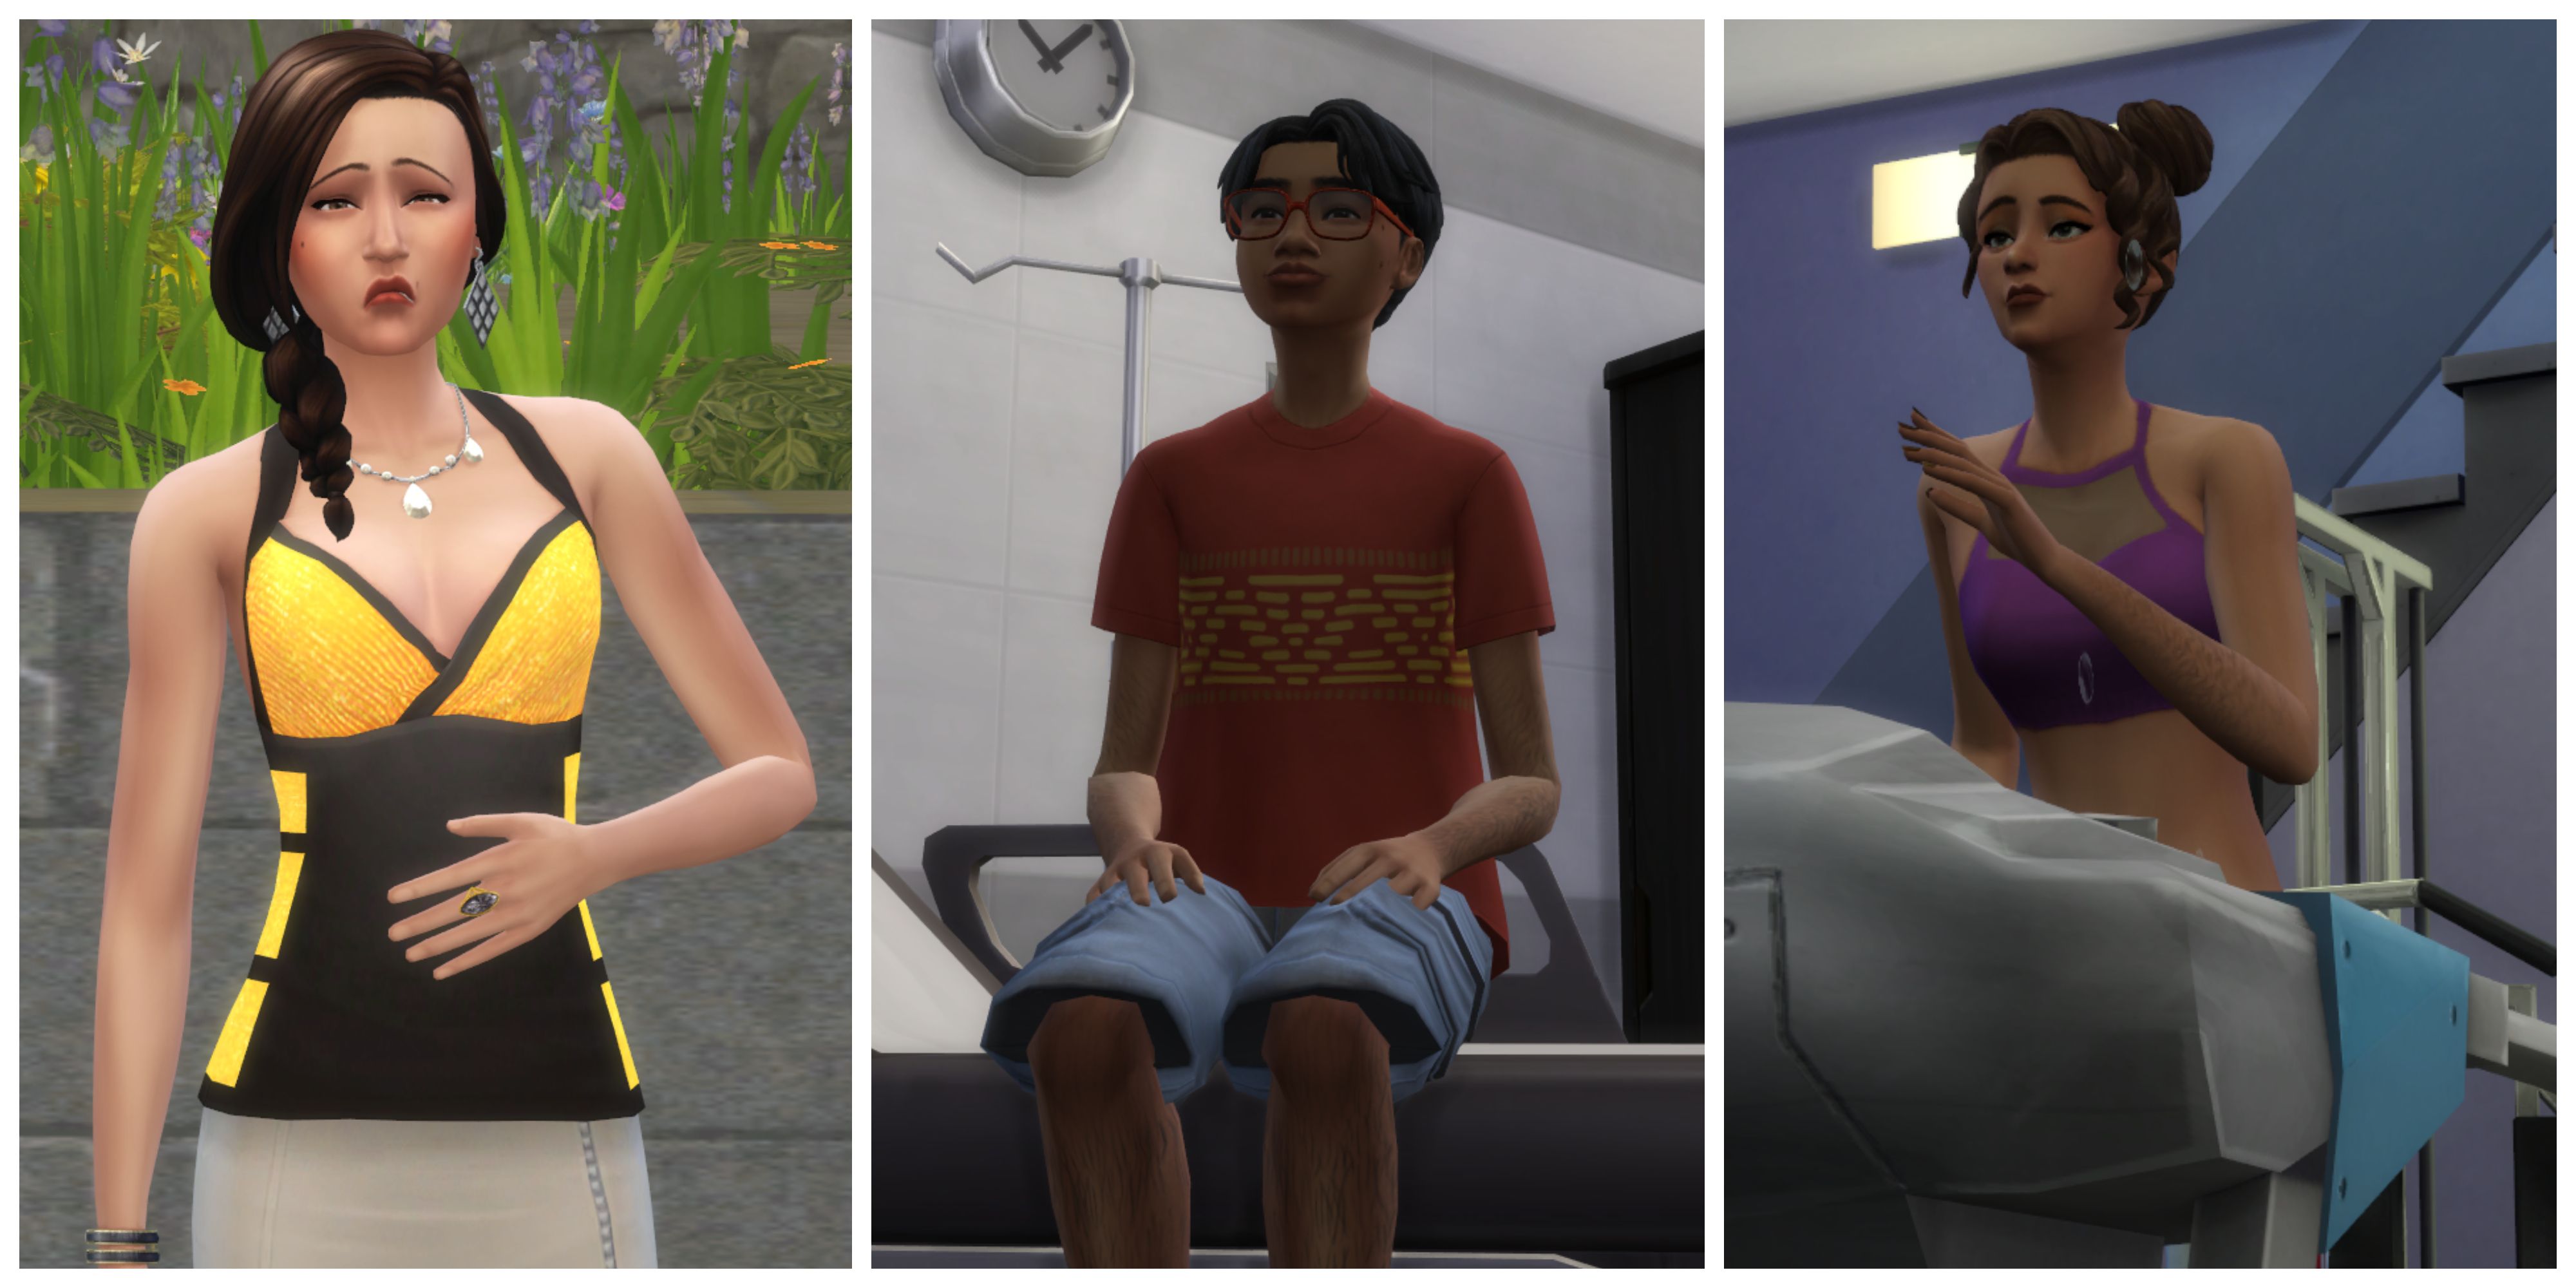 A Sim feeling sick, a Sim at the doctor, and a Sim working out, representing the ways players can use health and wellness mods to tell stories